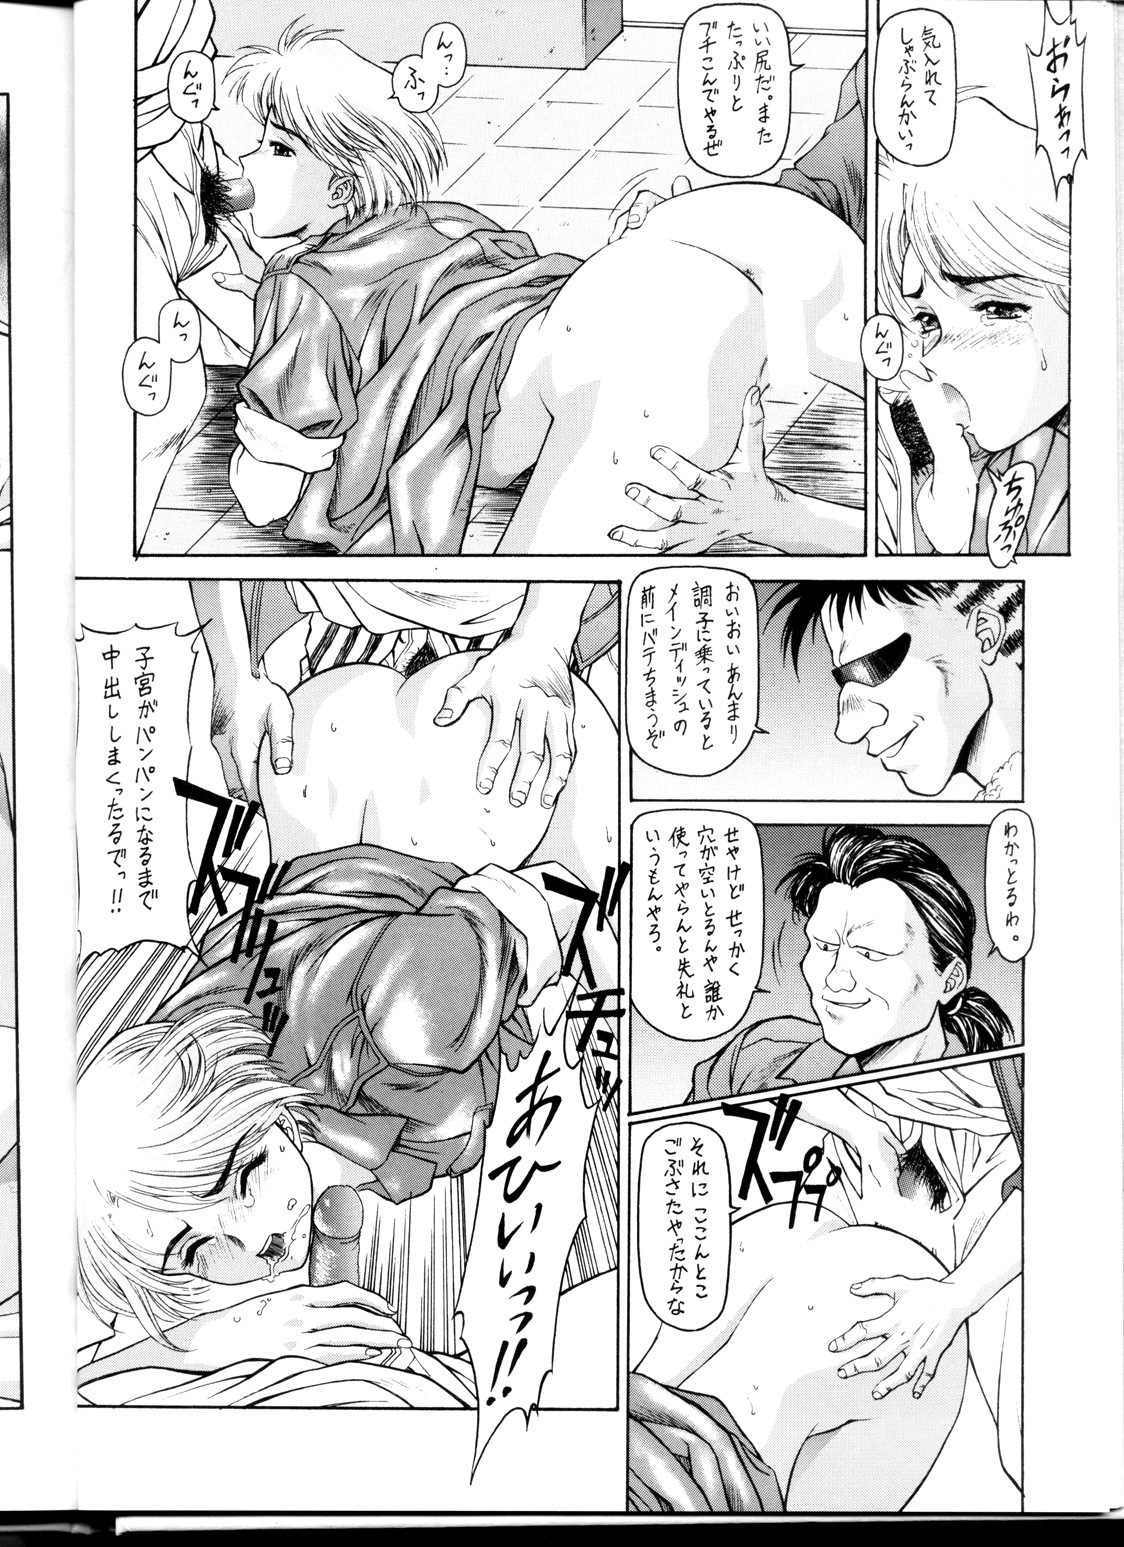 (C54) [ST.DIFFERENT (Various)] OUTLET 1 (Various) page 13 full